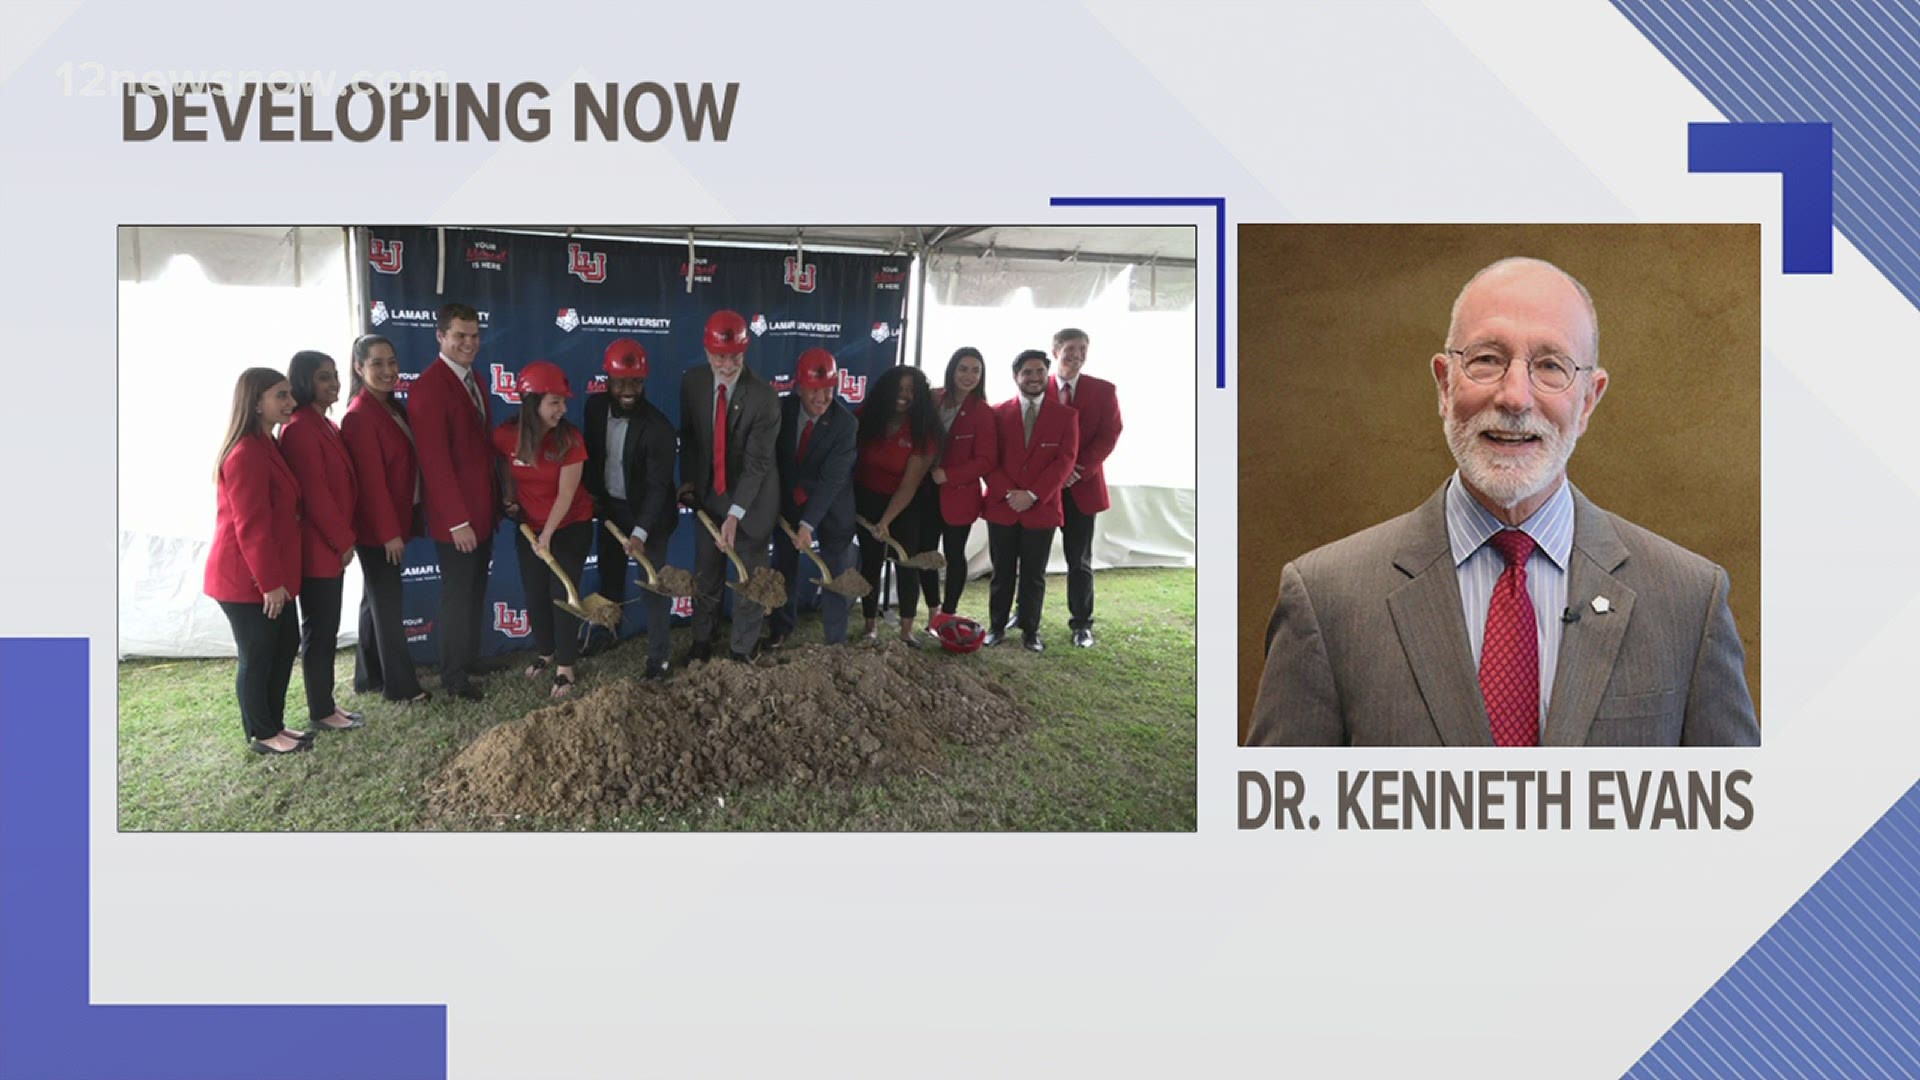 Dr. Kenneth Evans came to Lamar University in 2013. He focused on supporting faculty research, campus beautification and student recruitment.